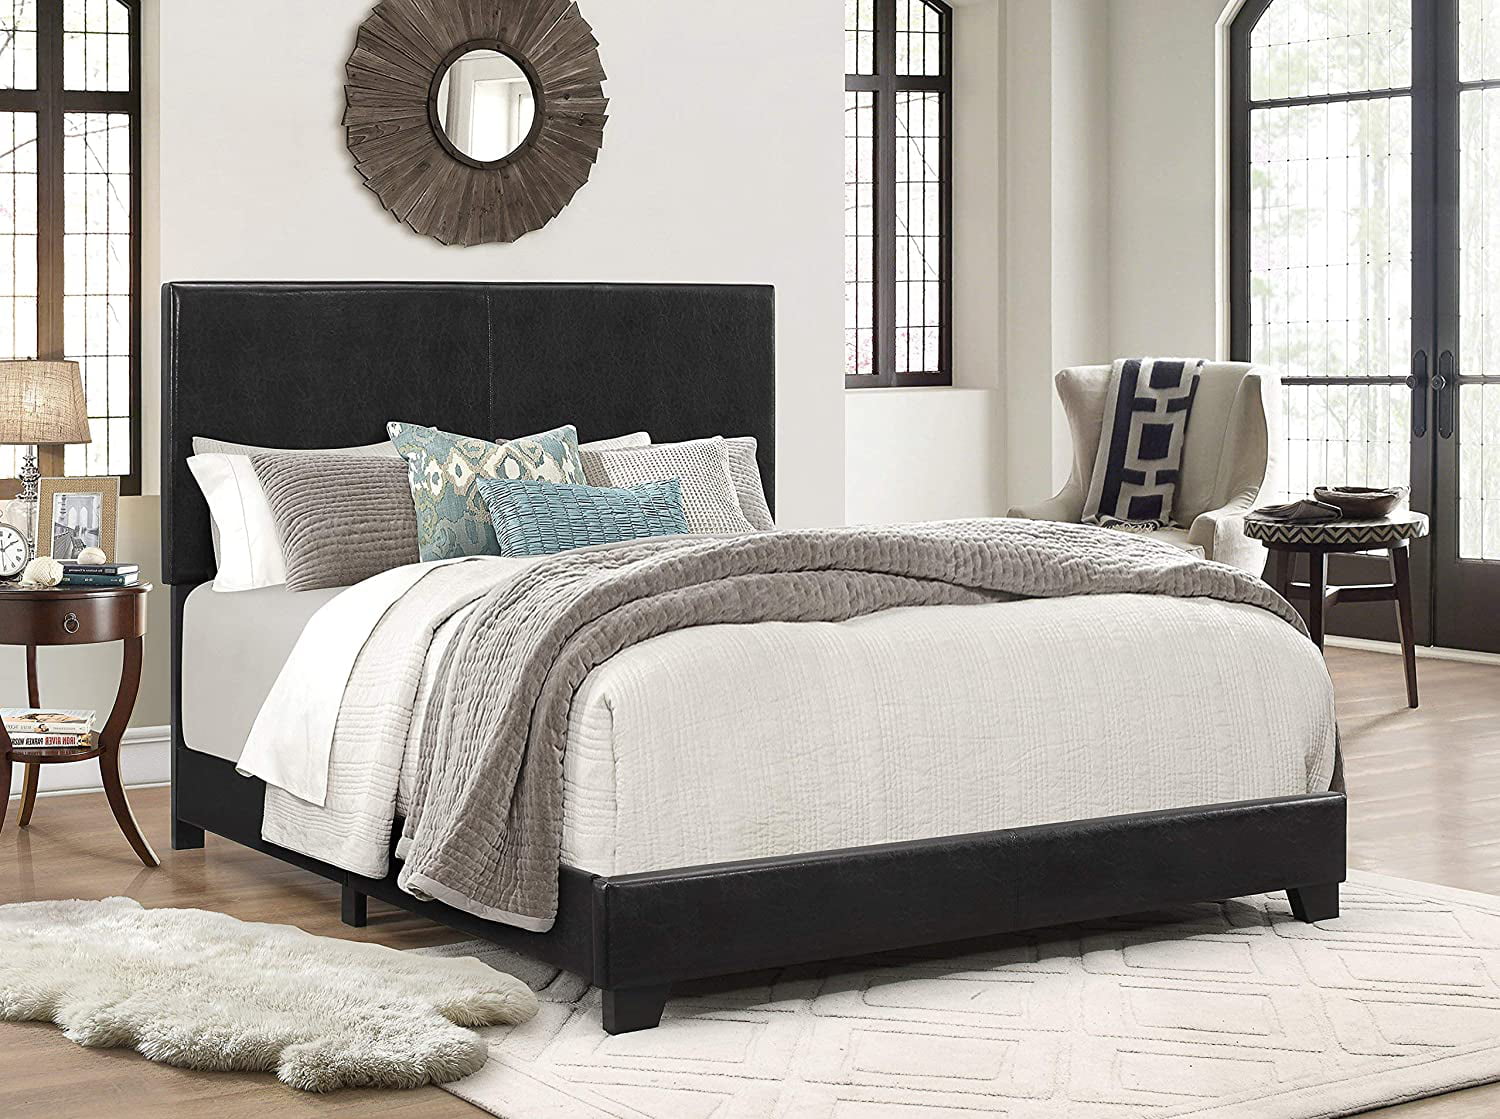 Transitional 1pc King Size Bed PU Fabric Upholstered Headboard